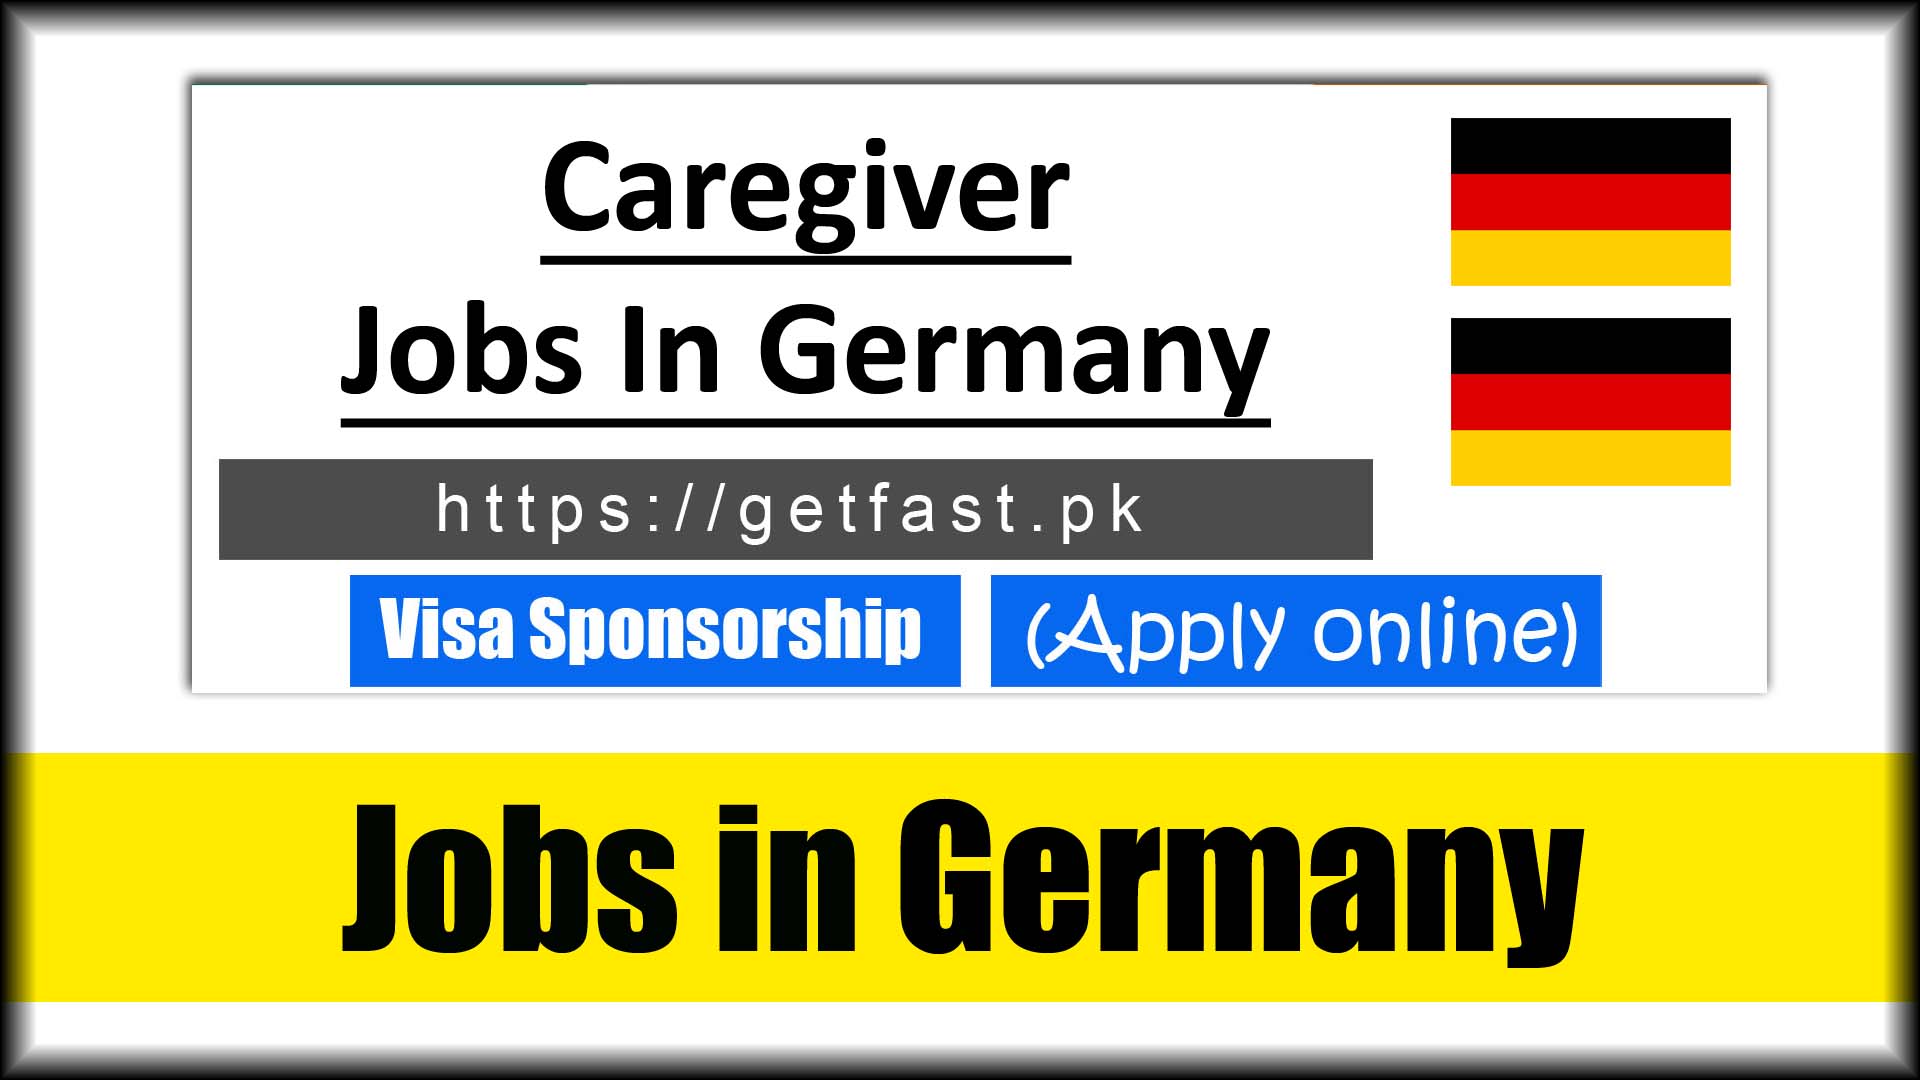 Caregiver Jobs In Germany